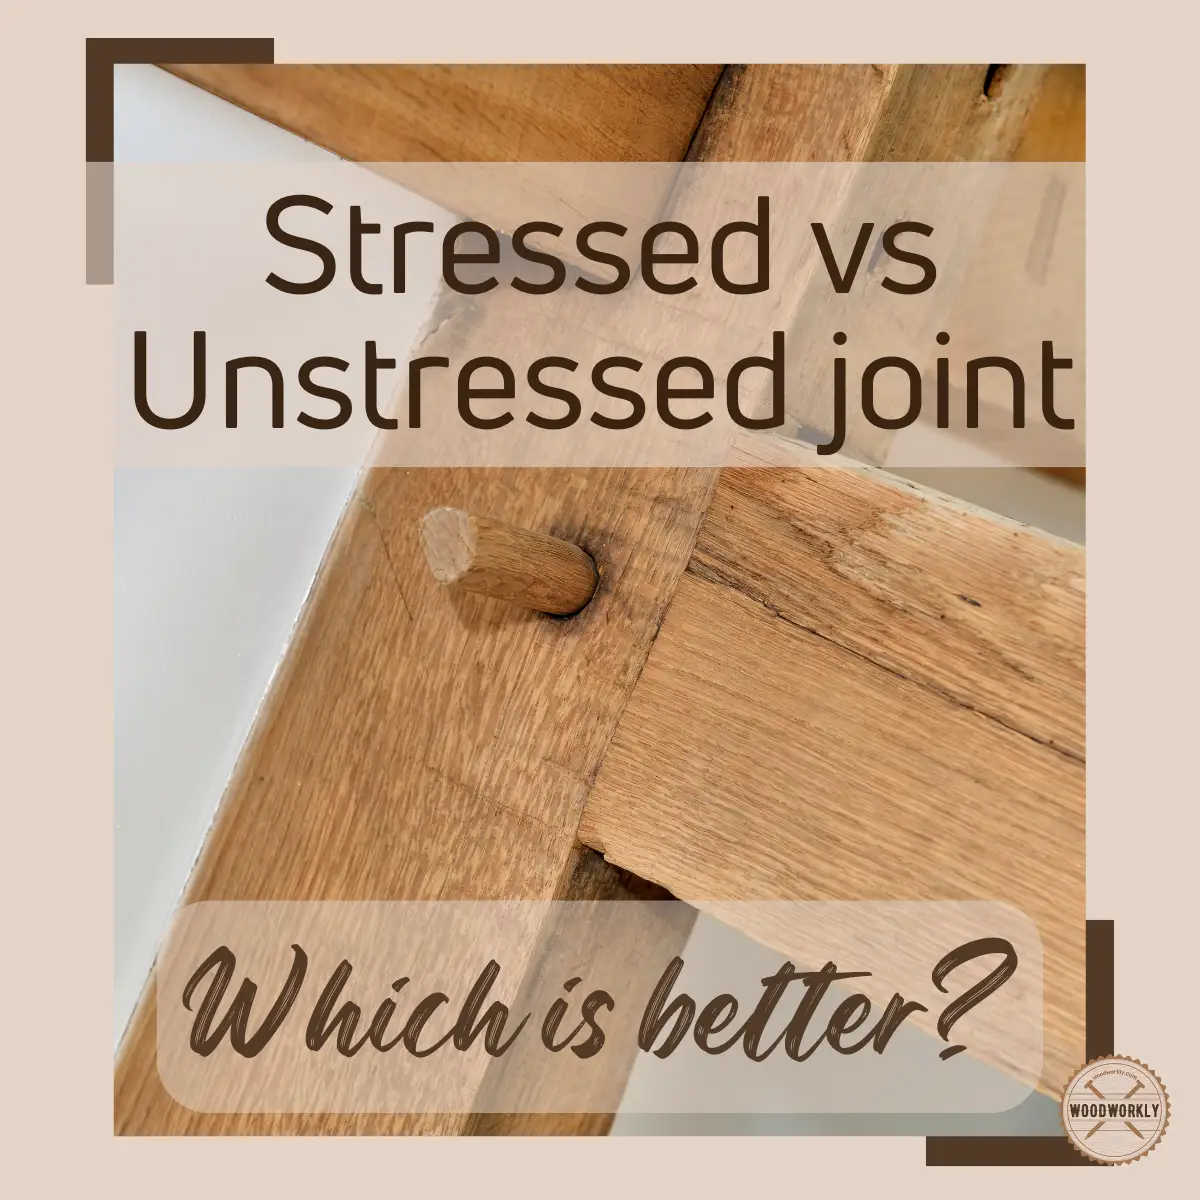 Stressed vs Unstressed joint